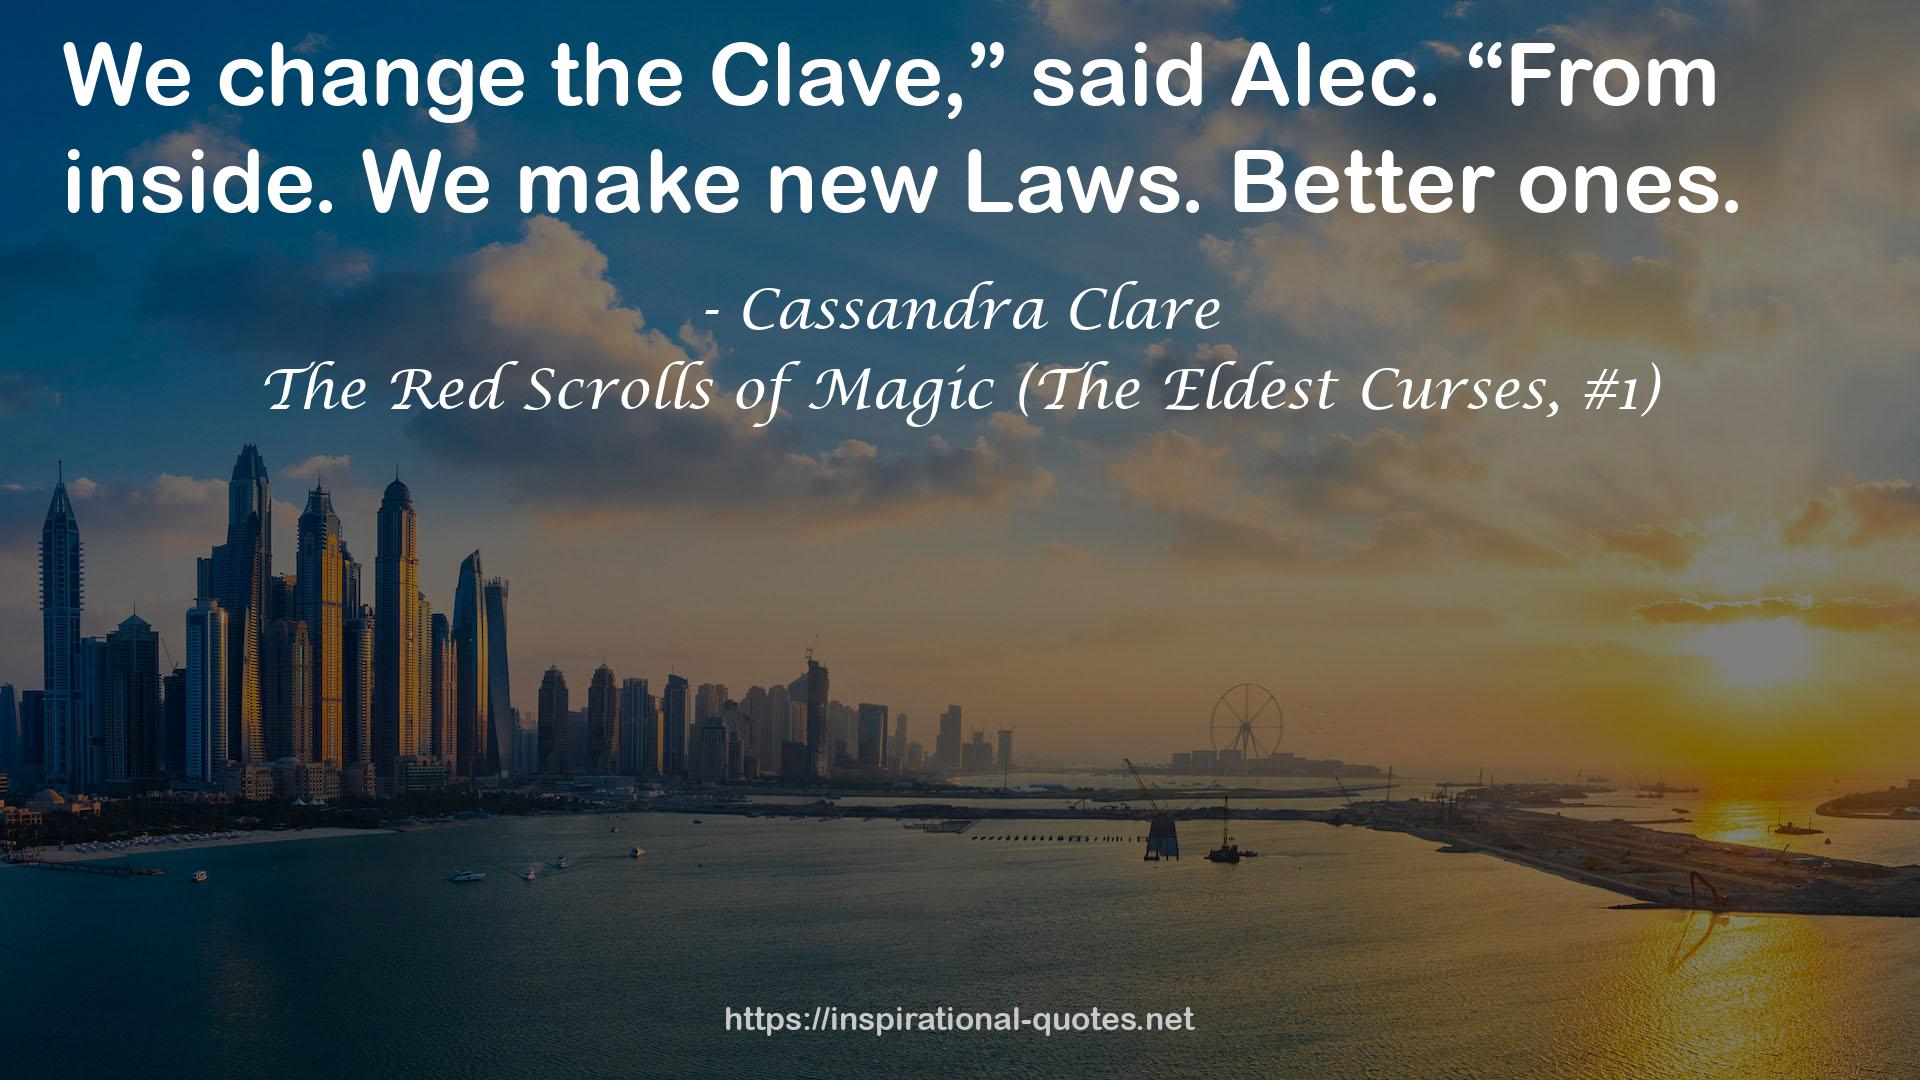 The Red Scrolls of Magic (The Eldest Curses, #1) QUOTES